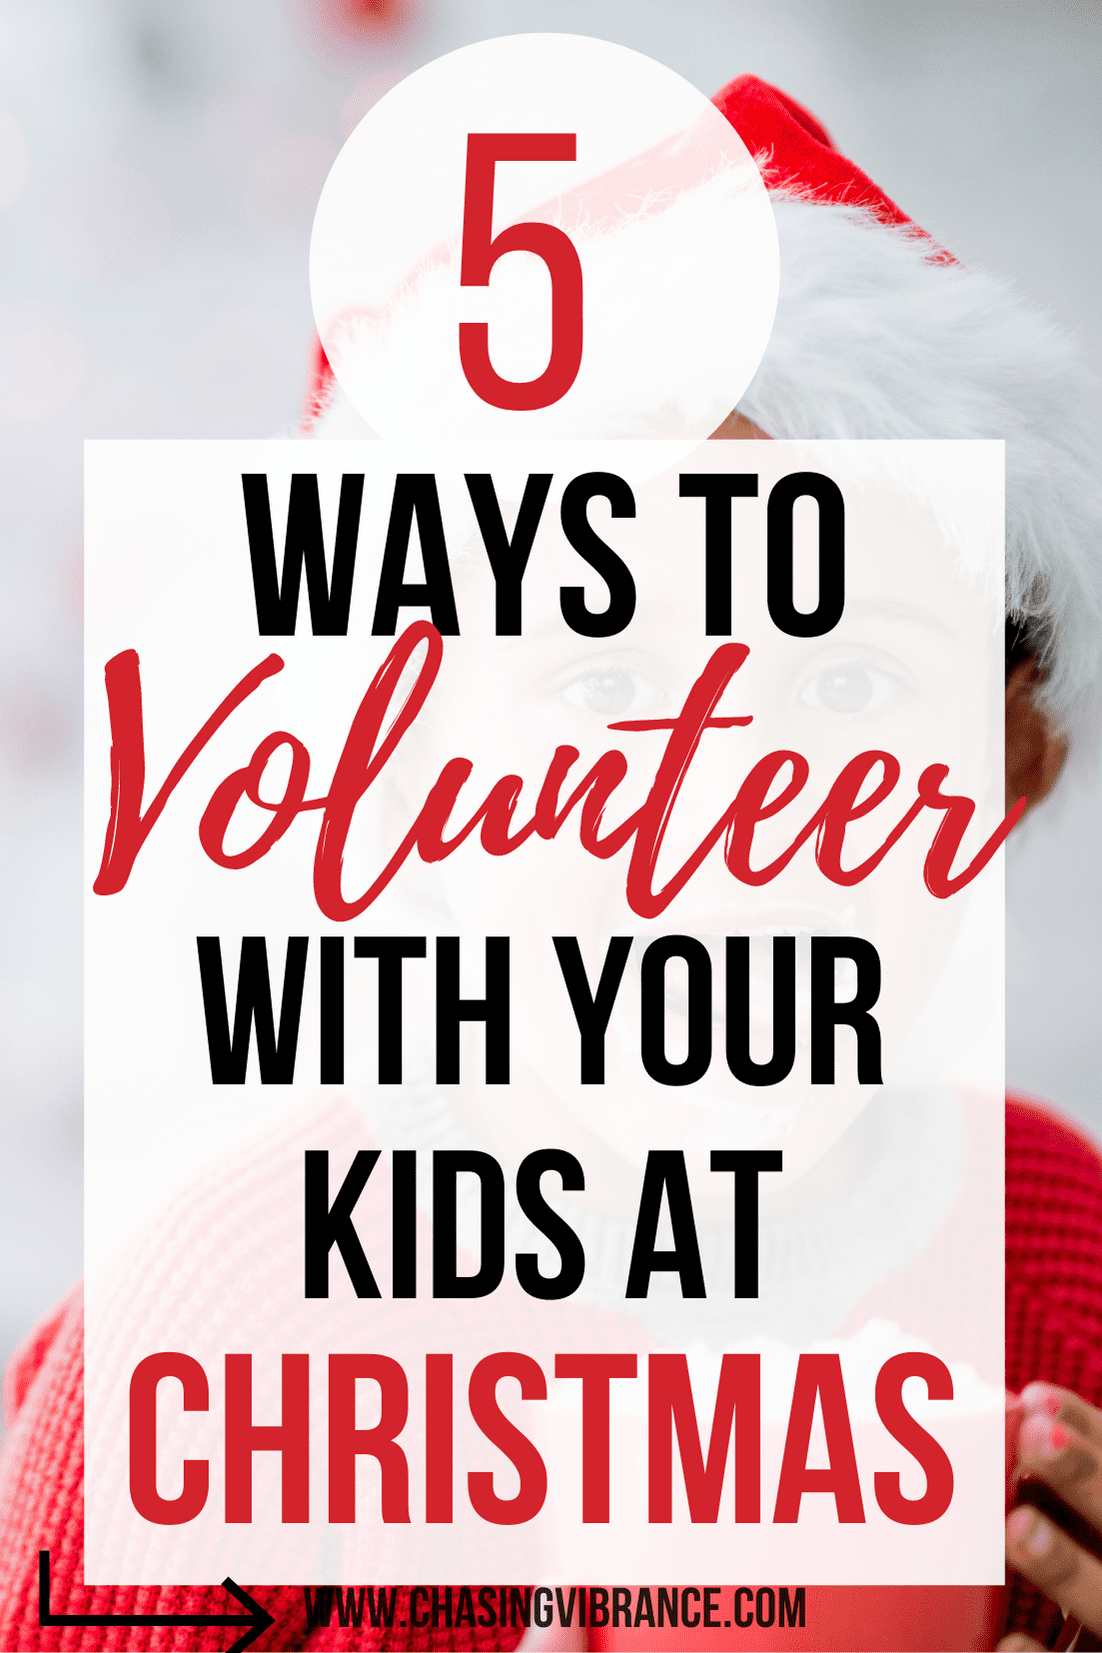 5 Easy Ways to Volunteer With Kids at Christmas